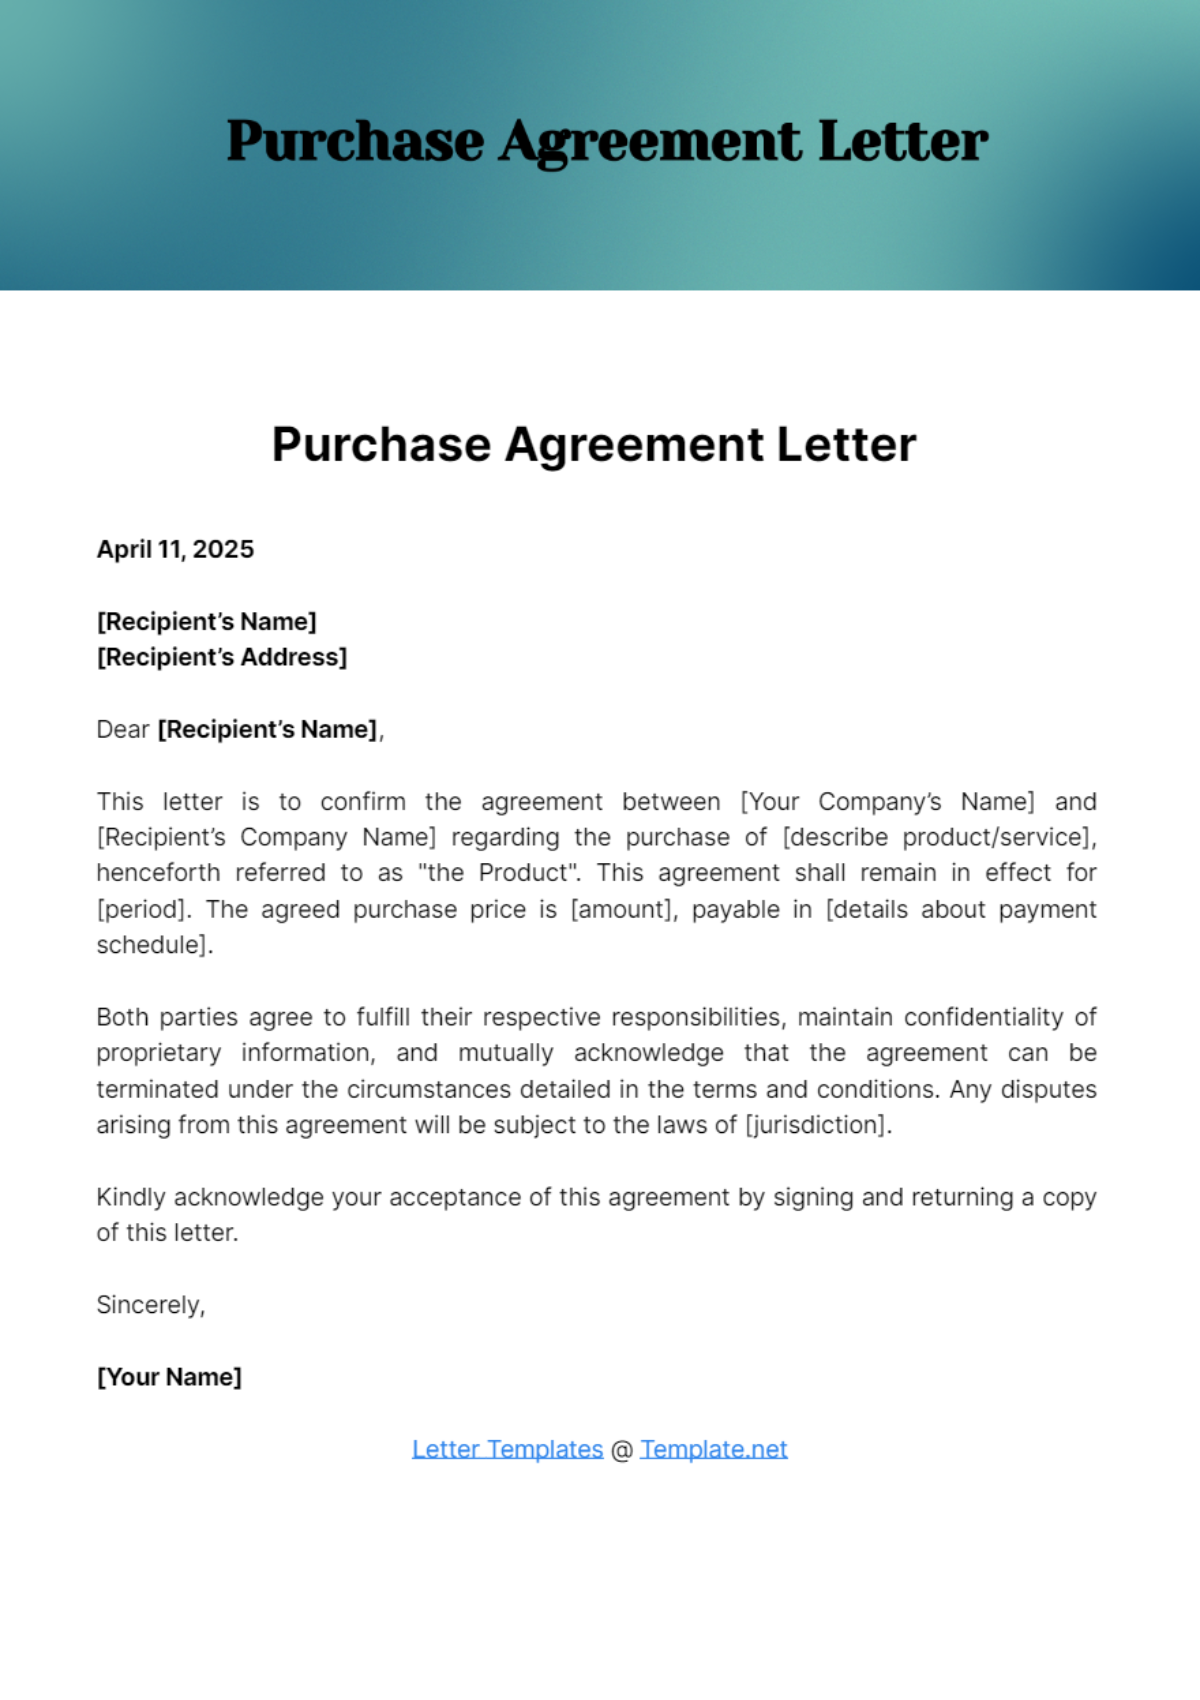 Purchase Agreement Letter Template